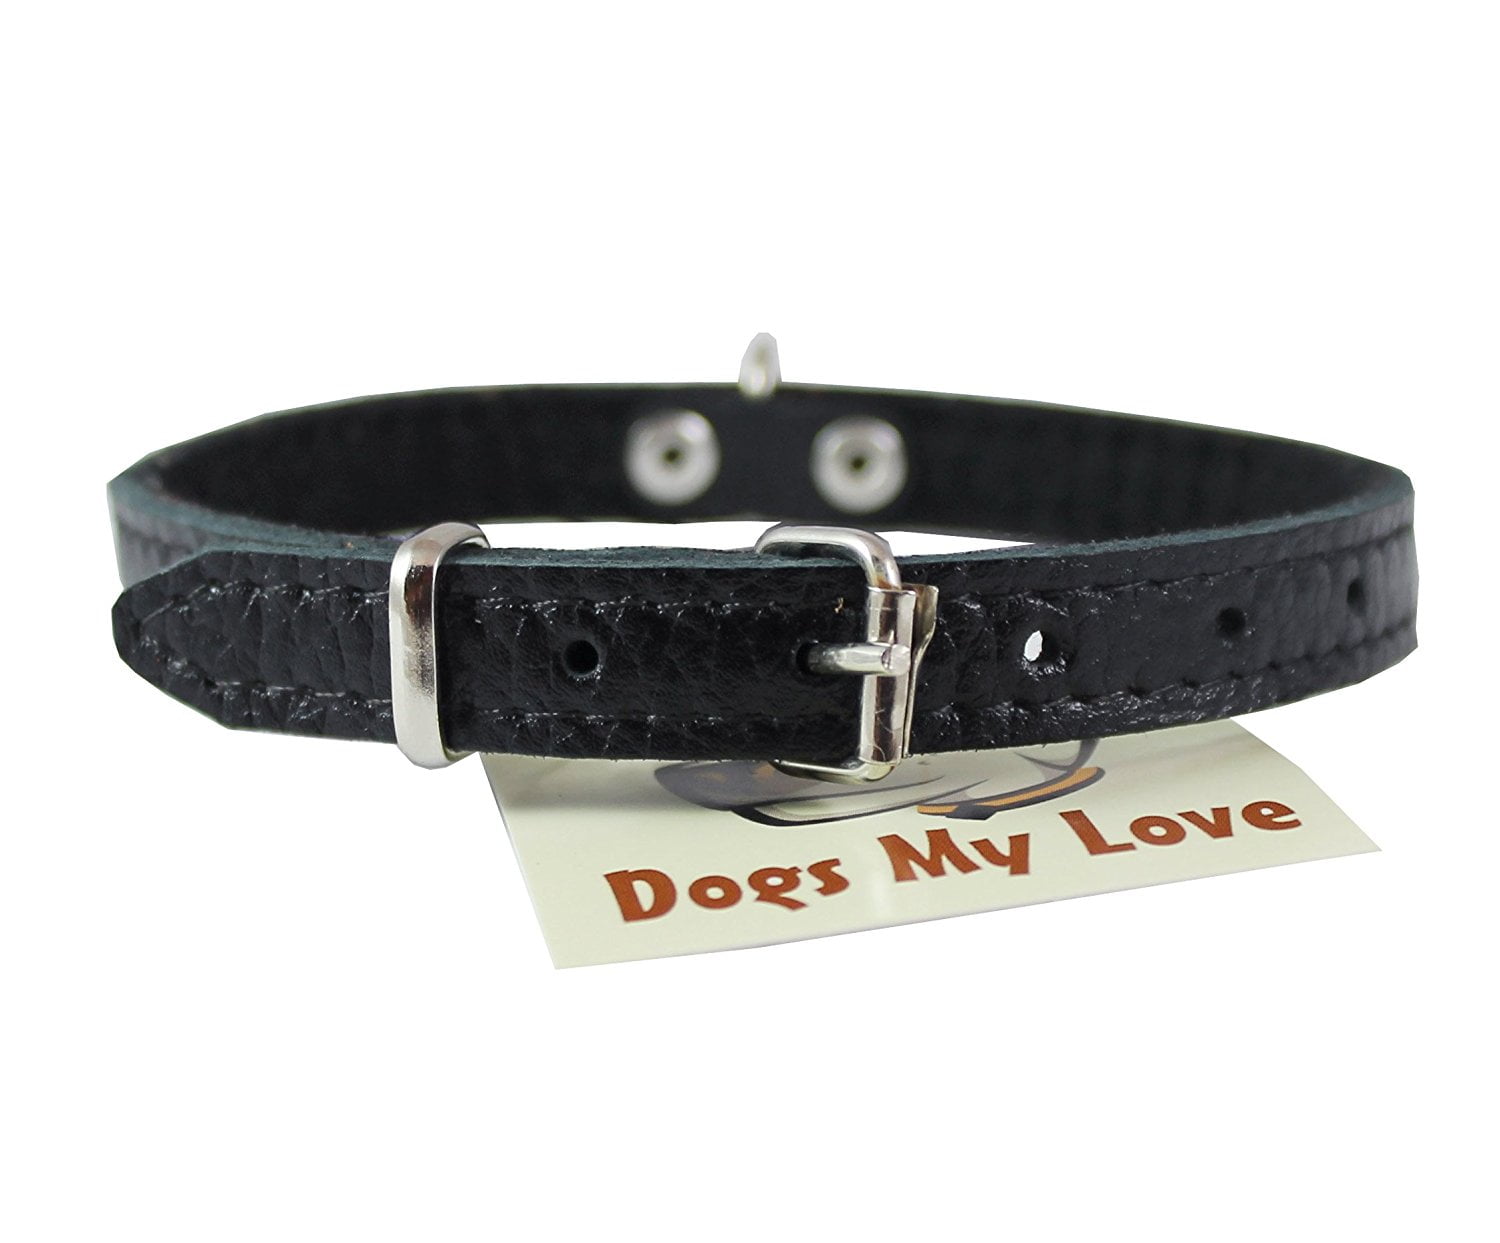 X SMALL DOG COLLAR + LEAD 6- 8 NECK. CHIHUAHUA, Puppy.